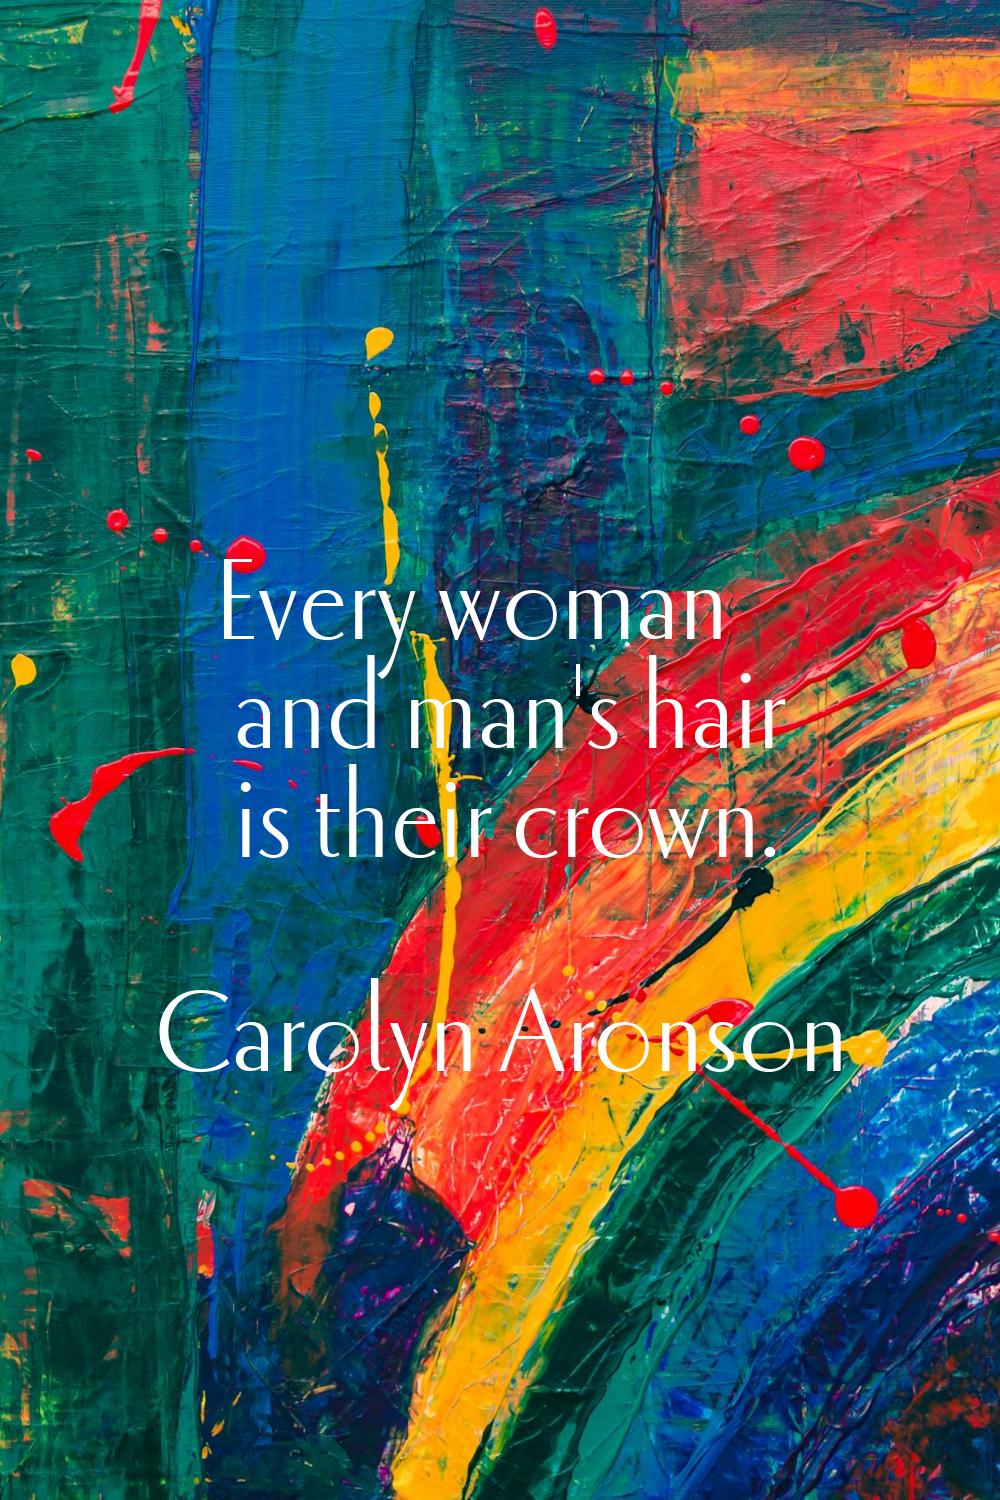 Every woman and man's hair is their crown.